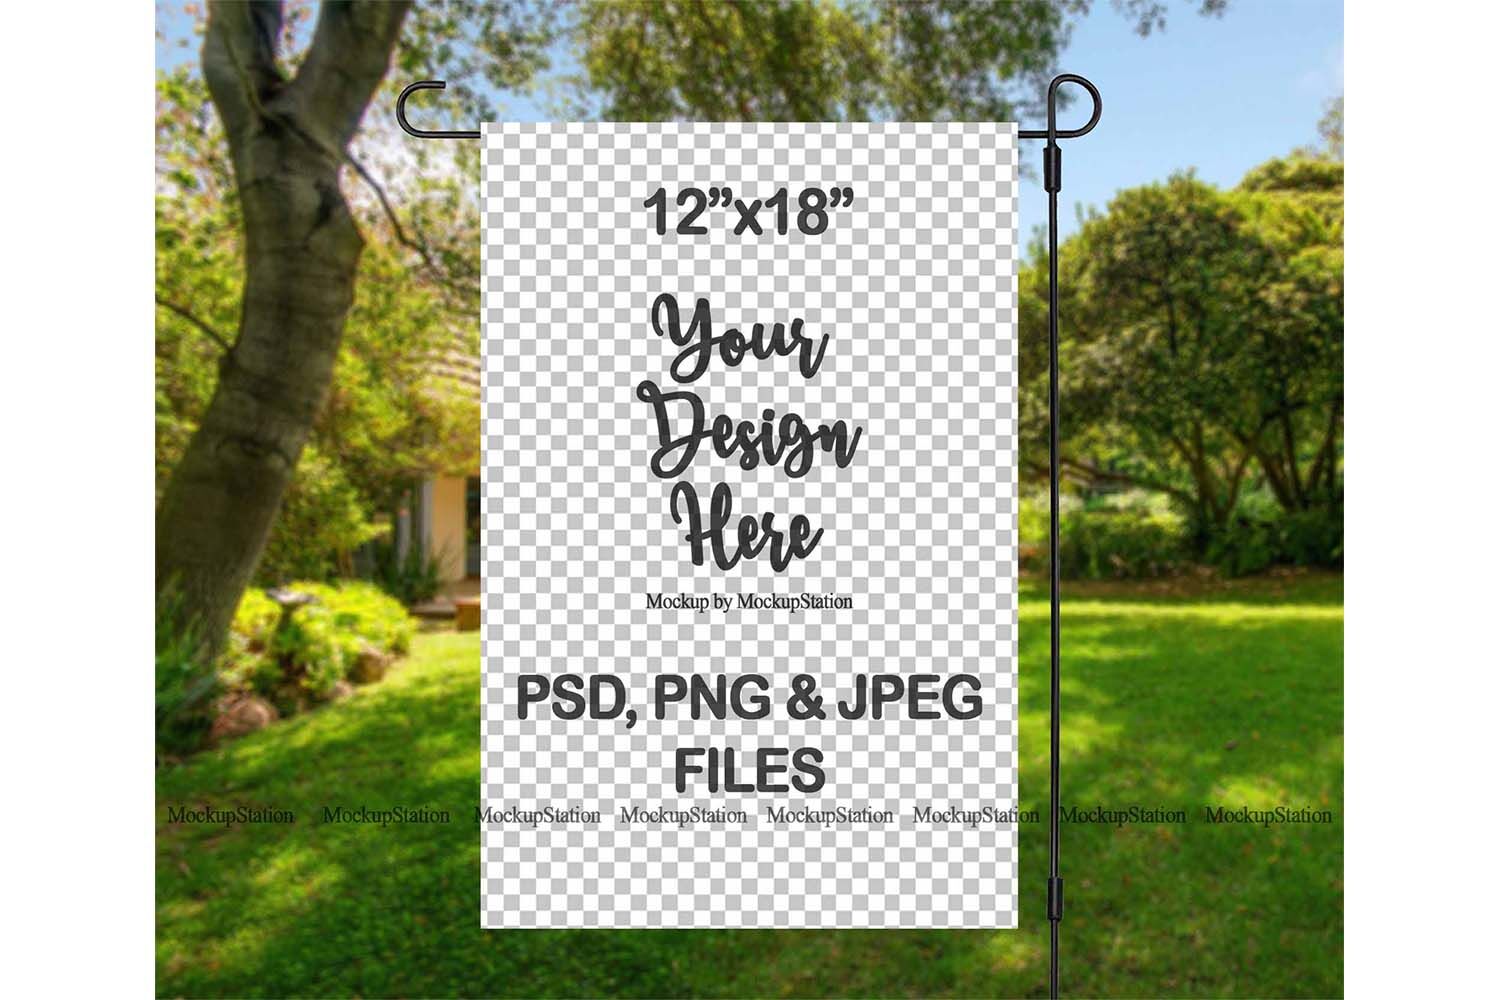 Garden Flag Mockup Psd File Add Your, How To Design Your Own Garden Flag